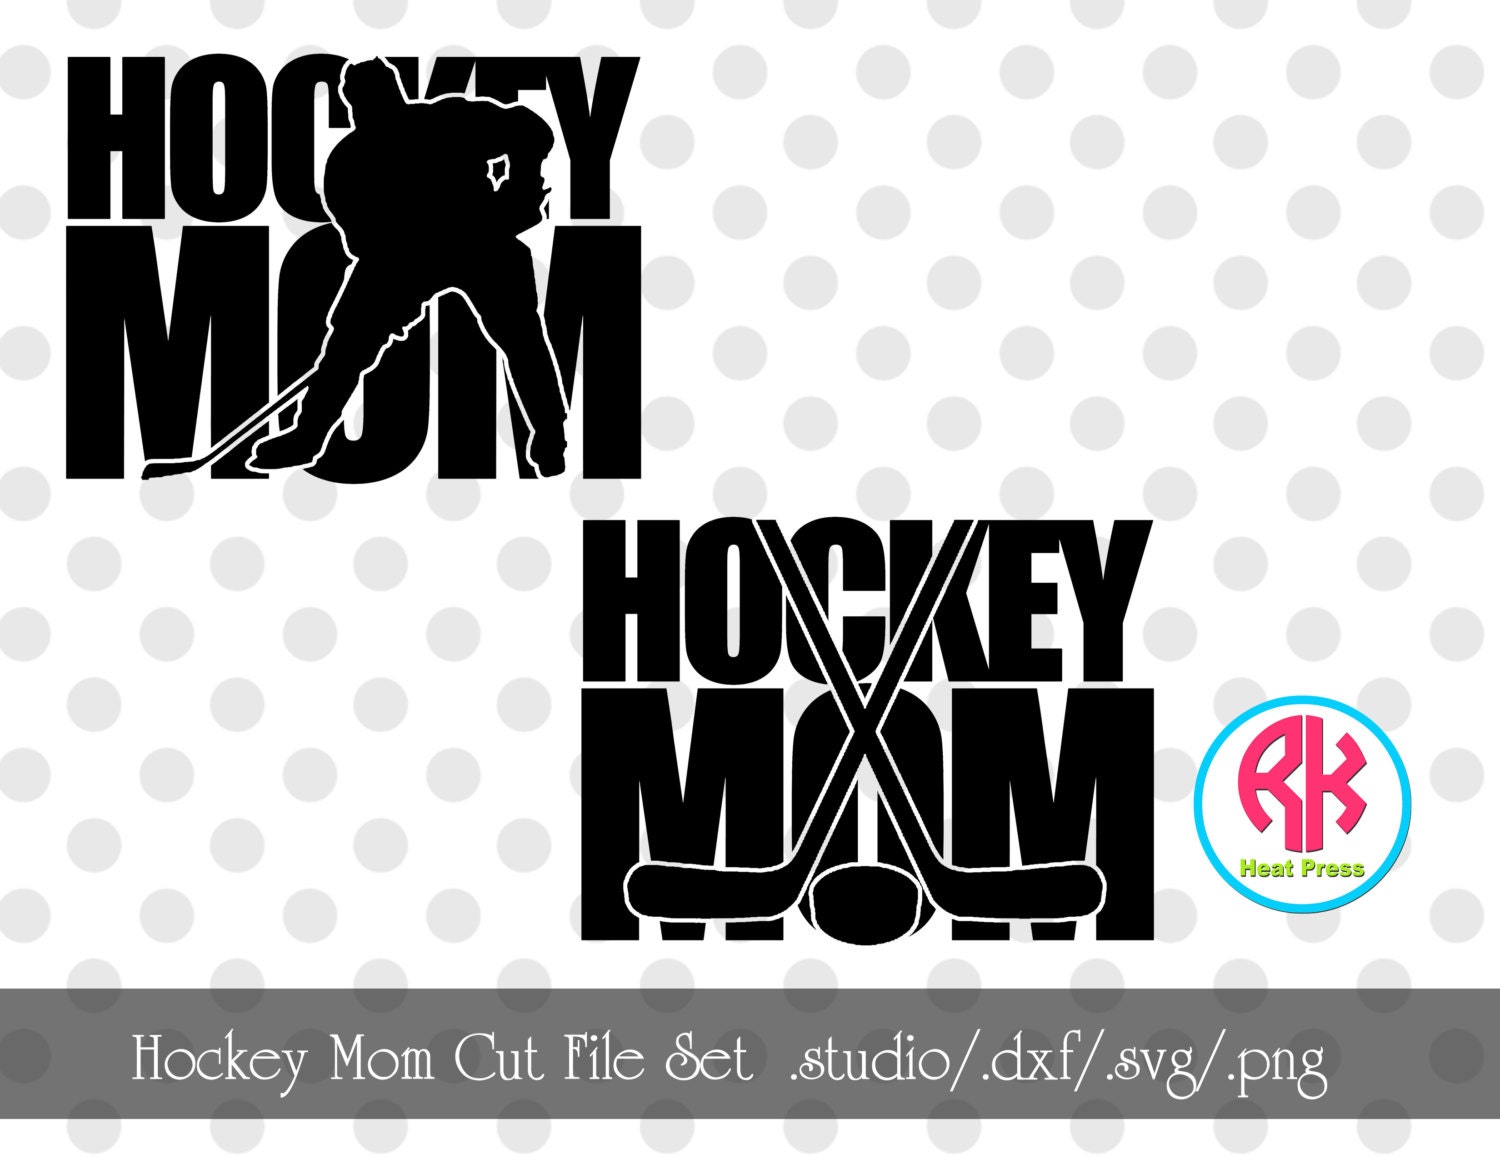 Download Hockey Mom Silhouette Cut Files . SVG .PNG .DXF